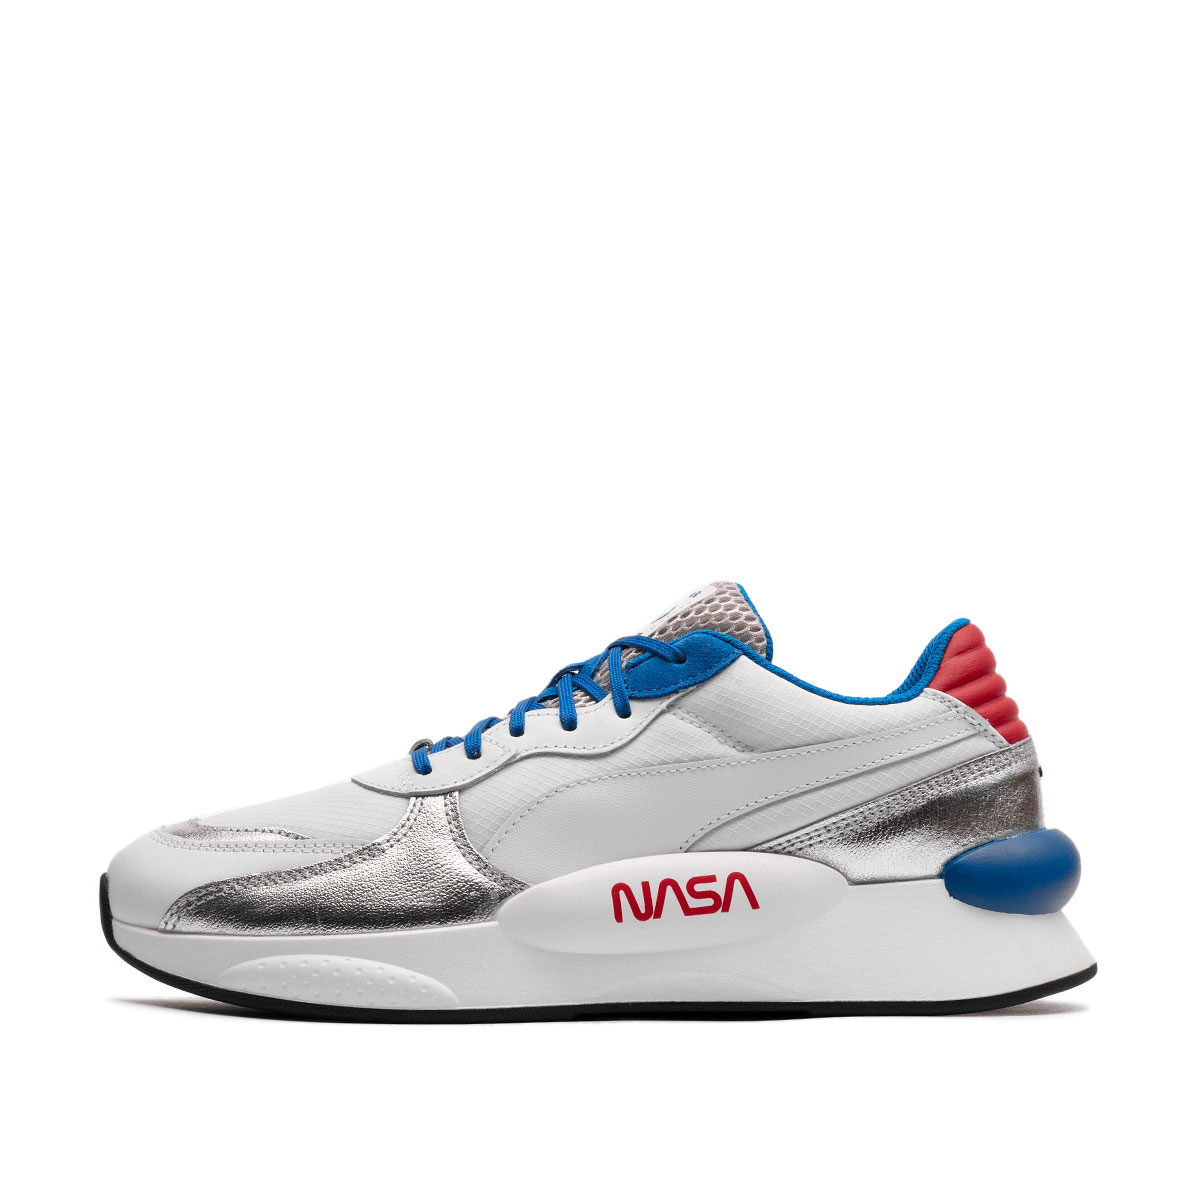 Puma RS 9.8 Space Agency  372509-01